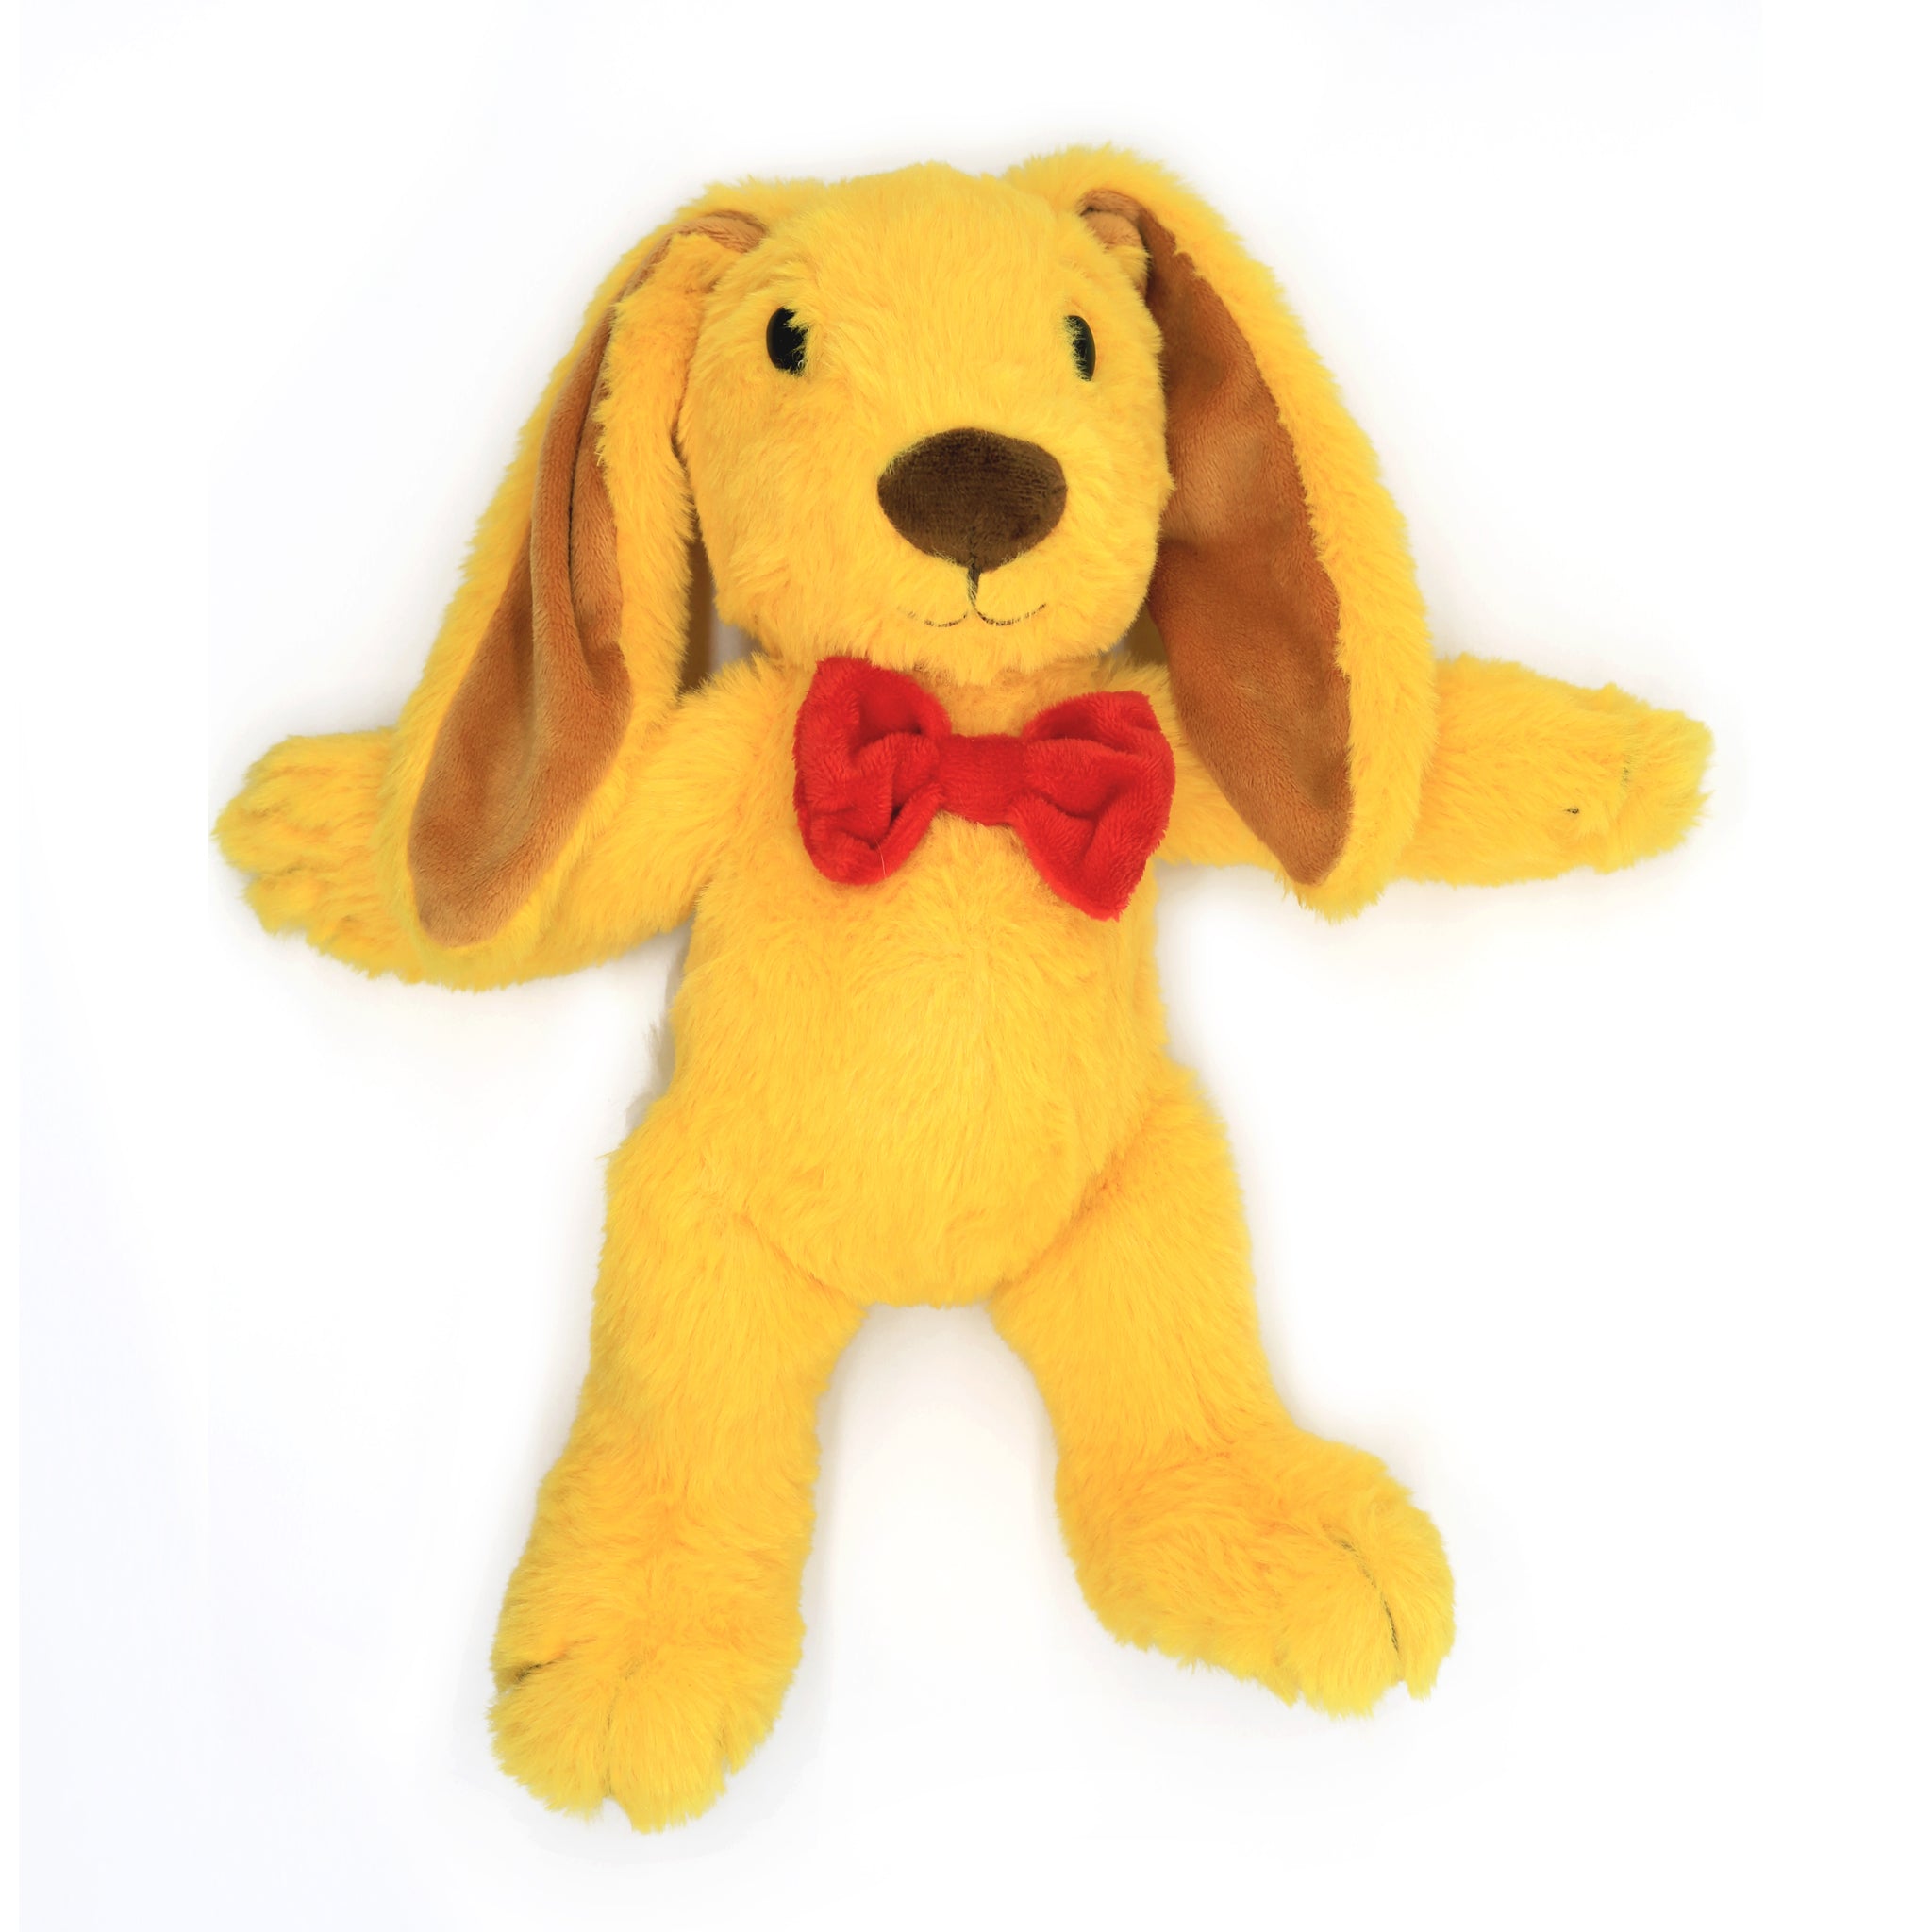 Zeke's Bunny Abacus: The Yellow Stuffed Plush comes with this BUNDLE and gives your child that warm best-friend boost to do it himself! 